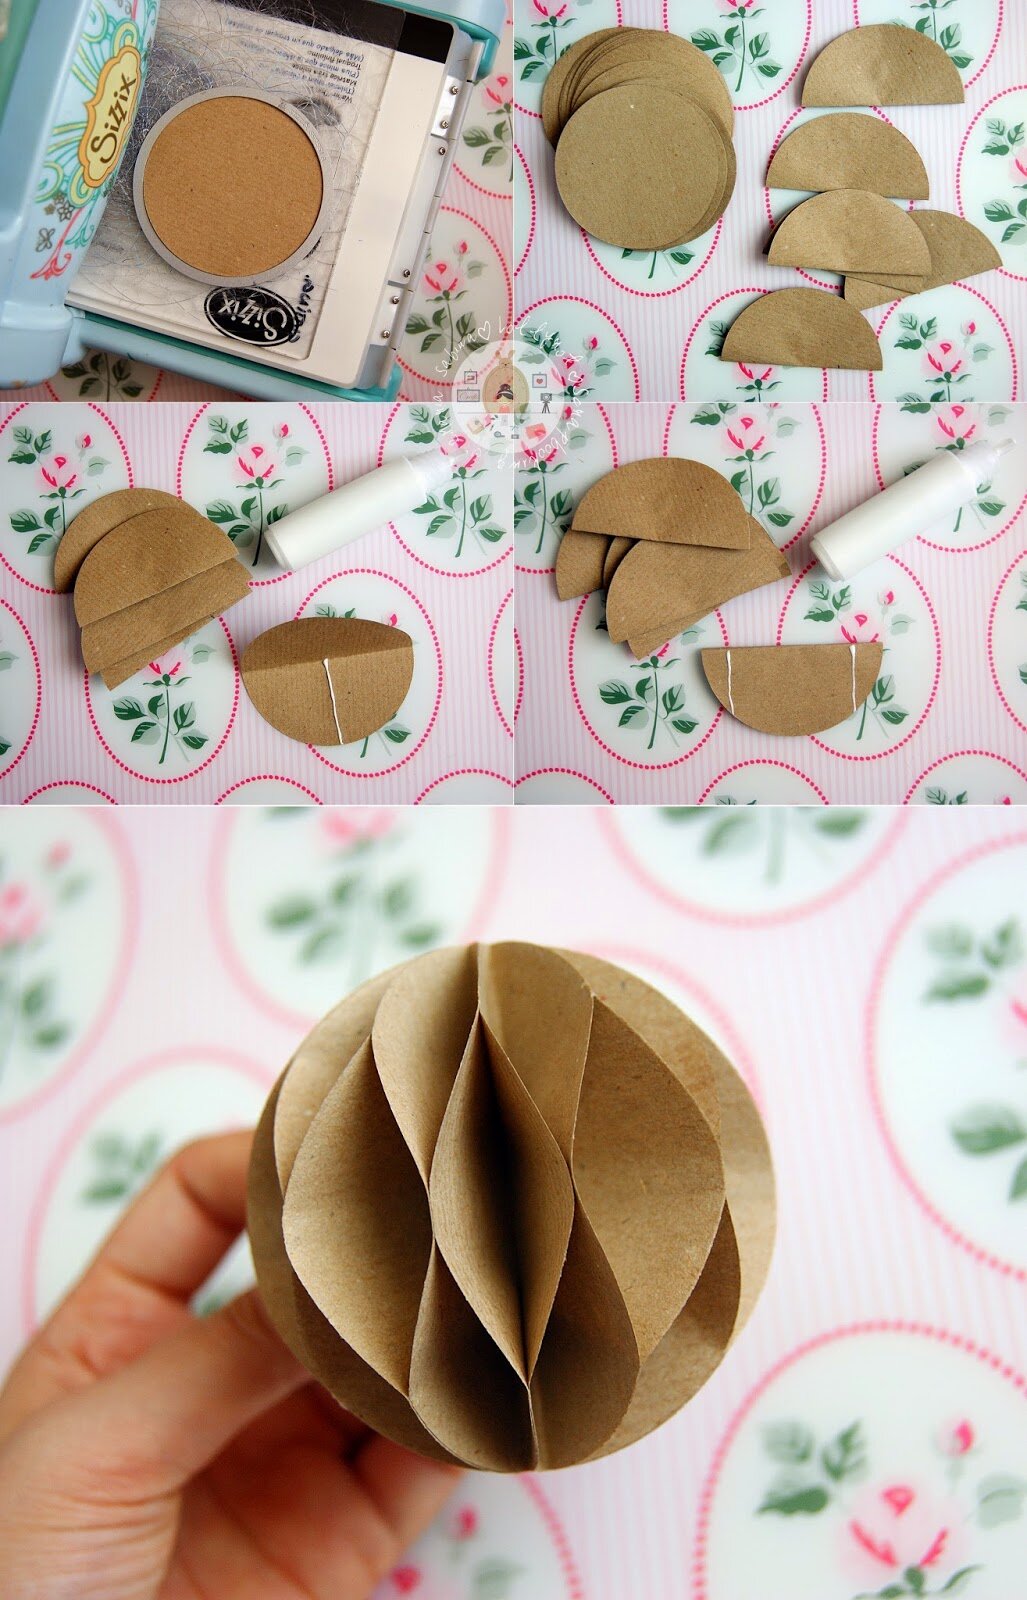 spherical handmaded paper ornament from brown craft paper